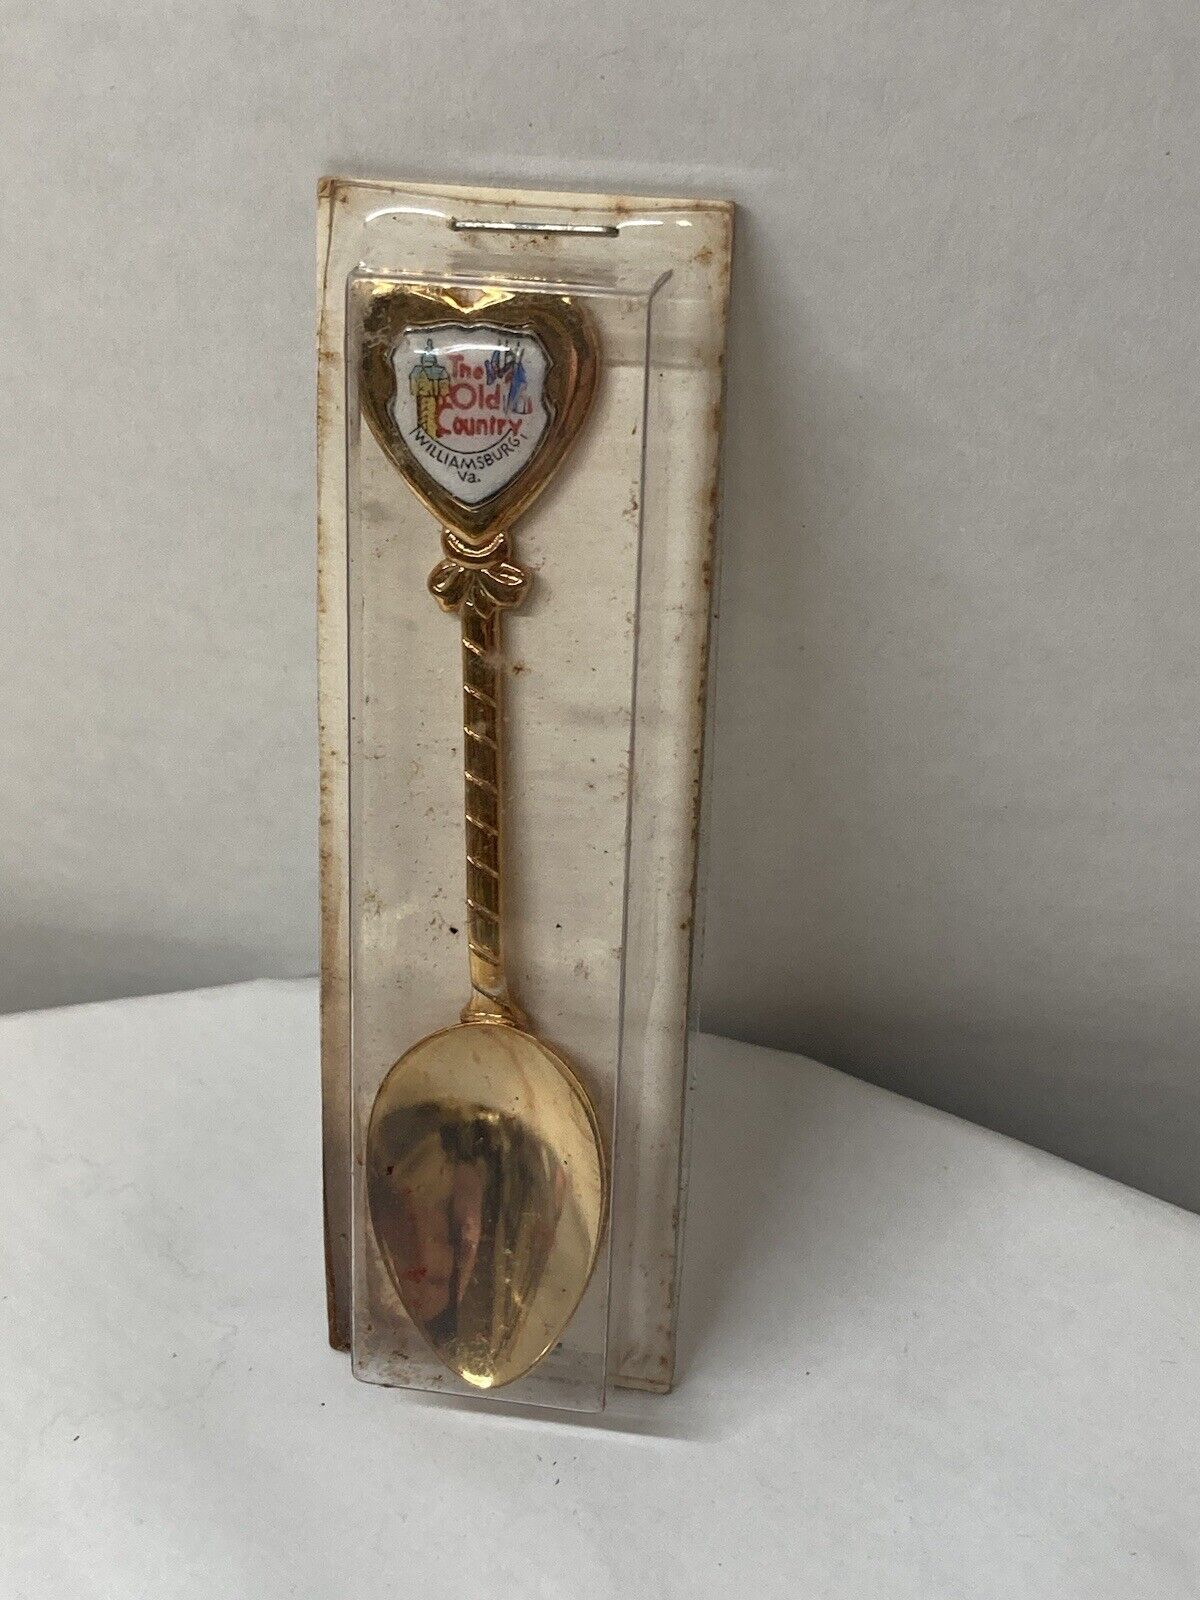 Vintage Collector Souvenir Spoon "The Old Country" Williamsburg, VA gold tone Без бренда